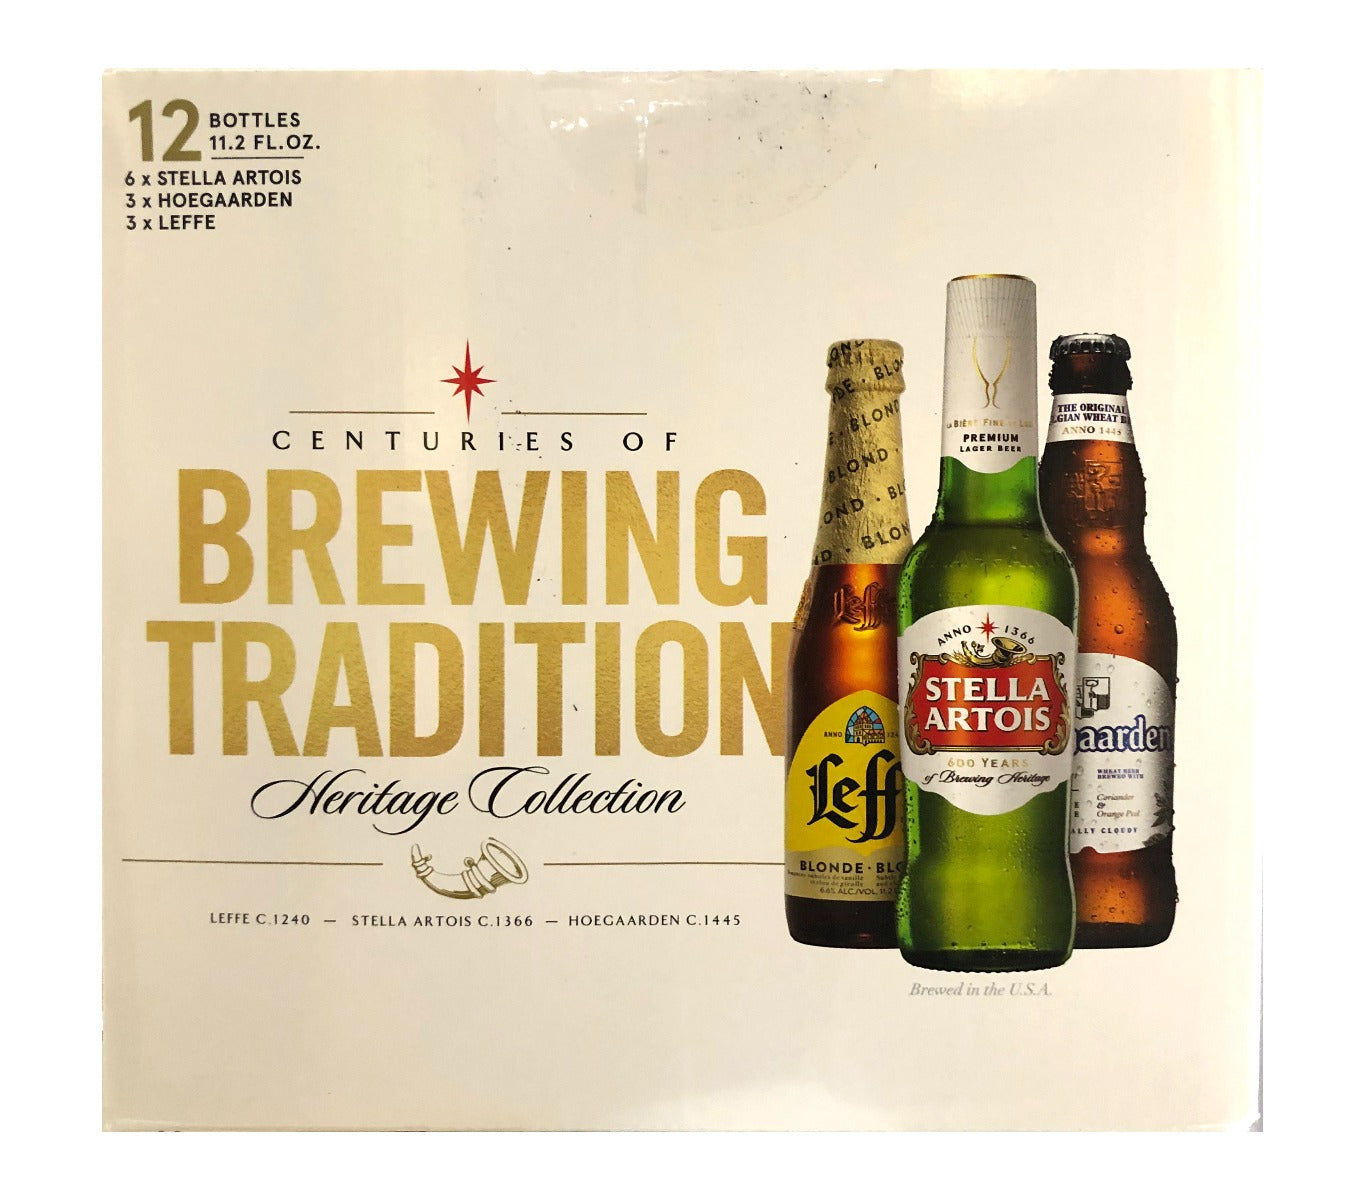 CENTURIES OF BREWING TRADITION HERITAGE COLLECTION (6 STELLA ARTOIS, 3 HOEGAARDEN, 3 LEFFE) 12X12OZ BOT - Remedy Liquor